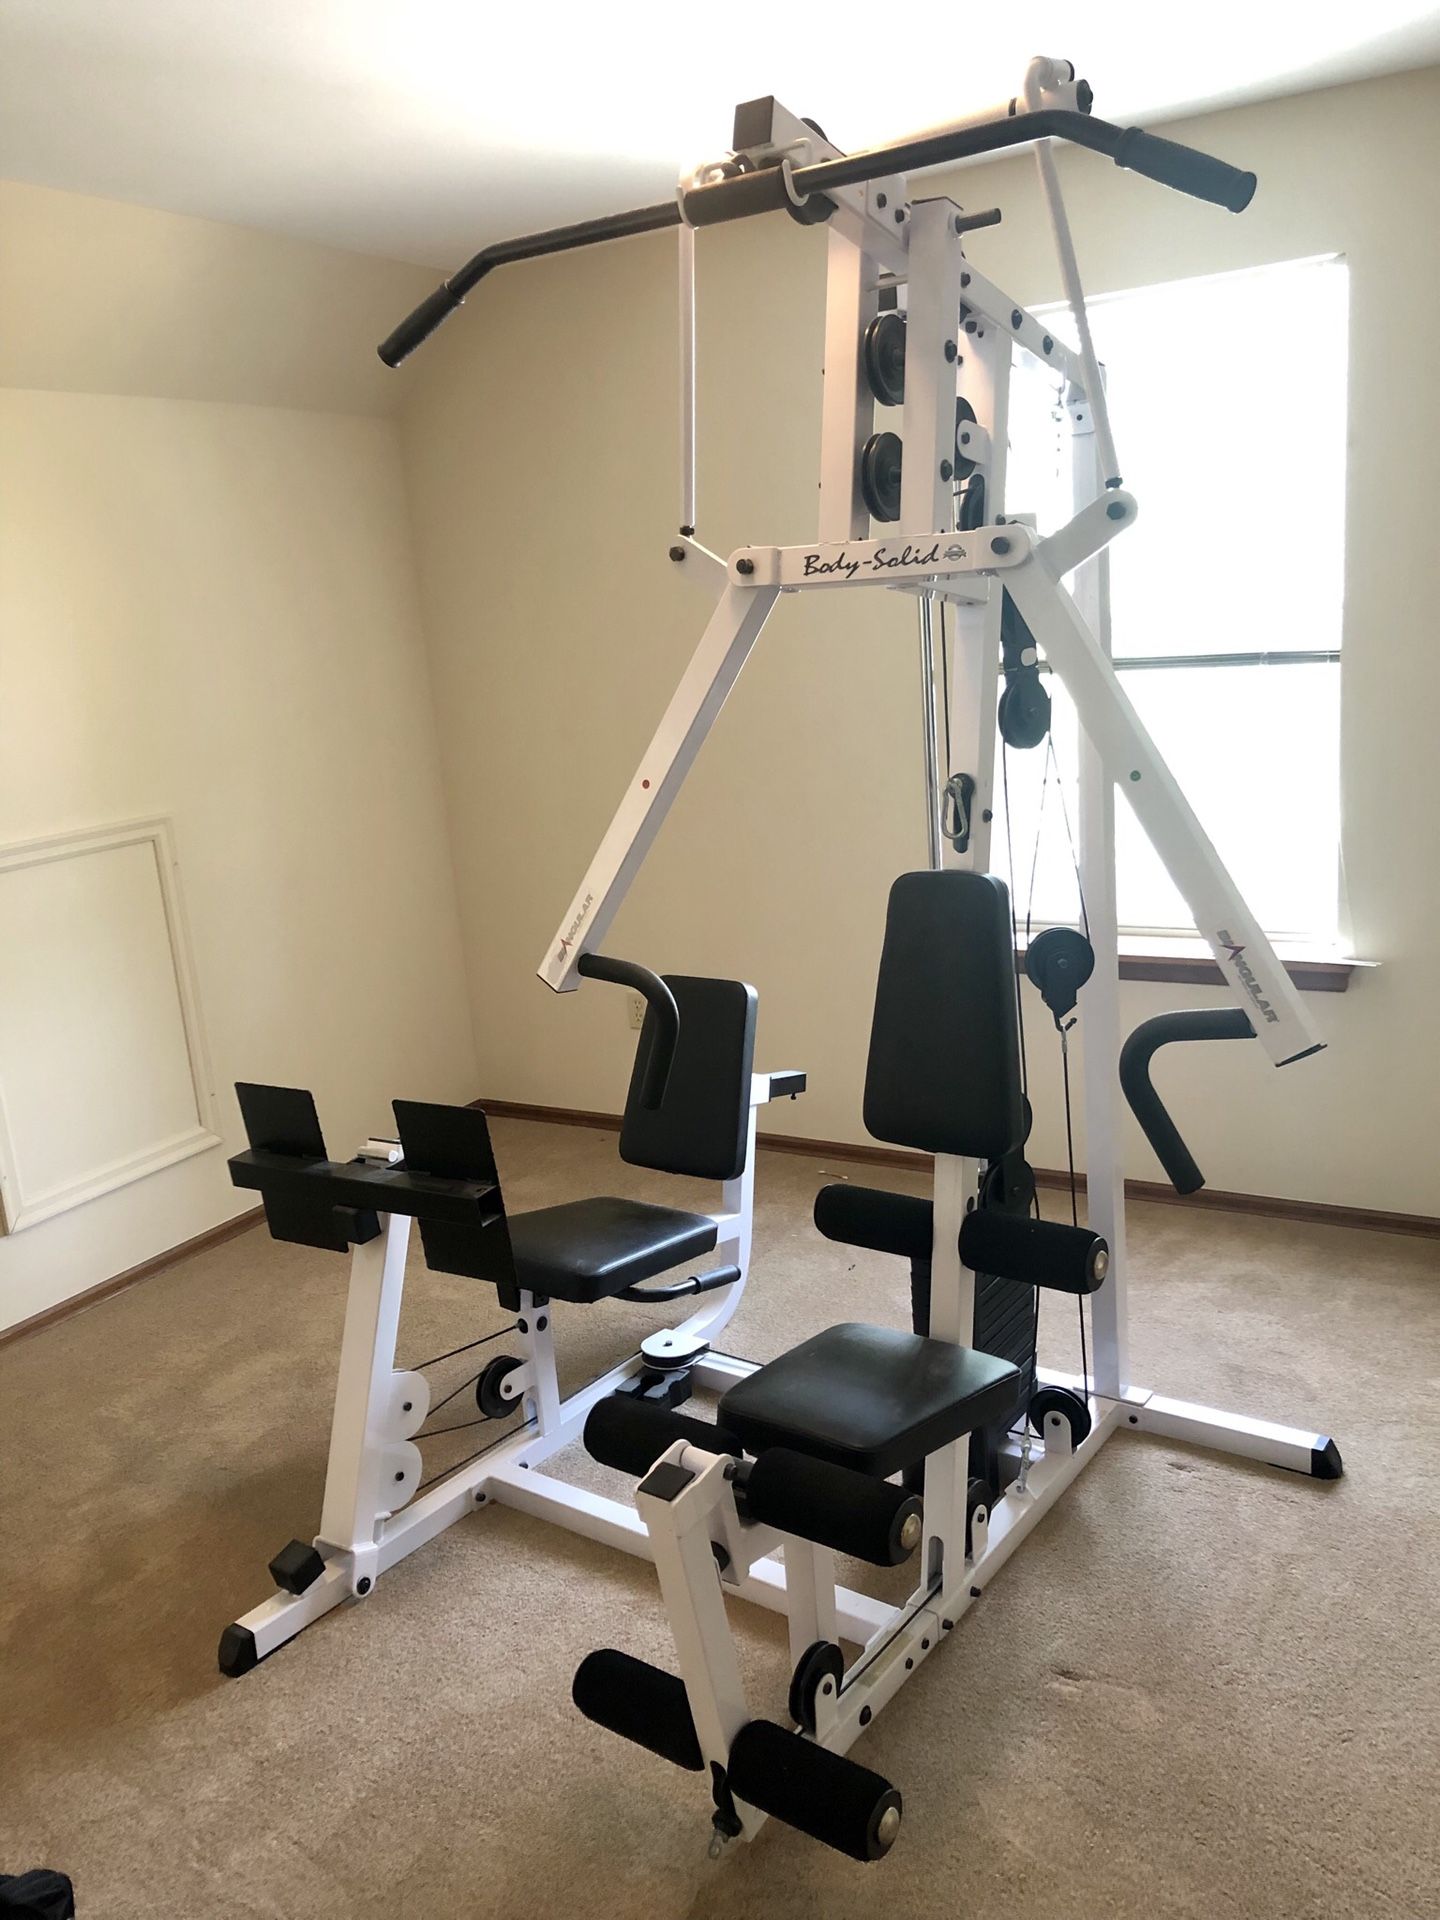 Body solid home gym with leg press and weight stack